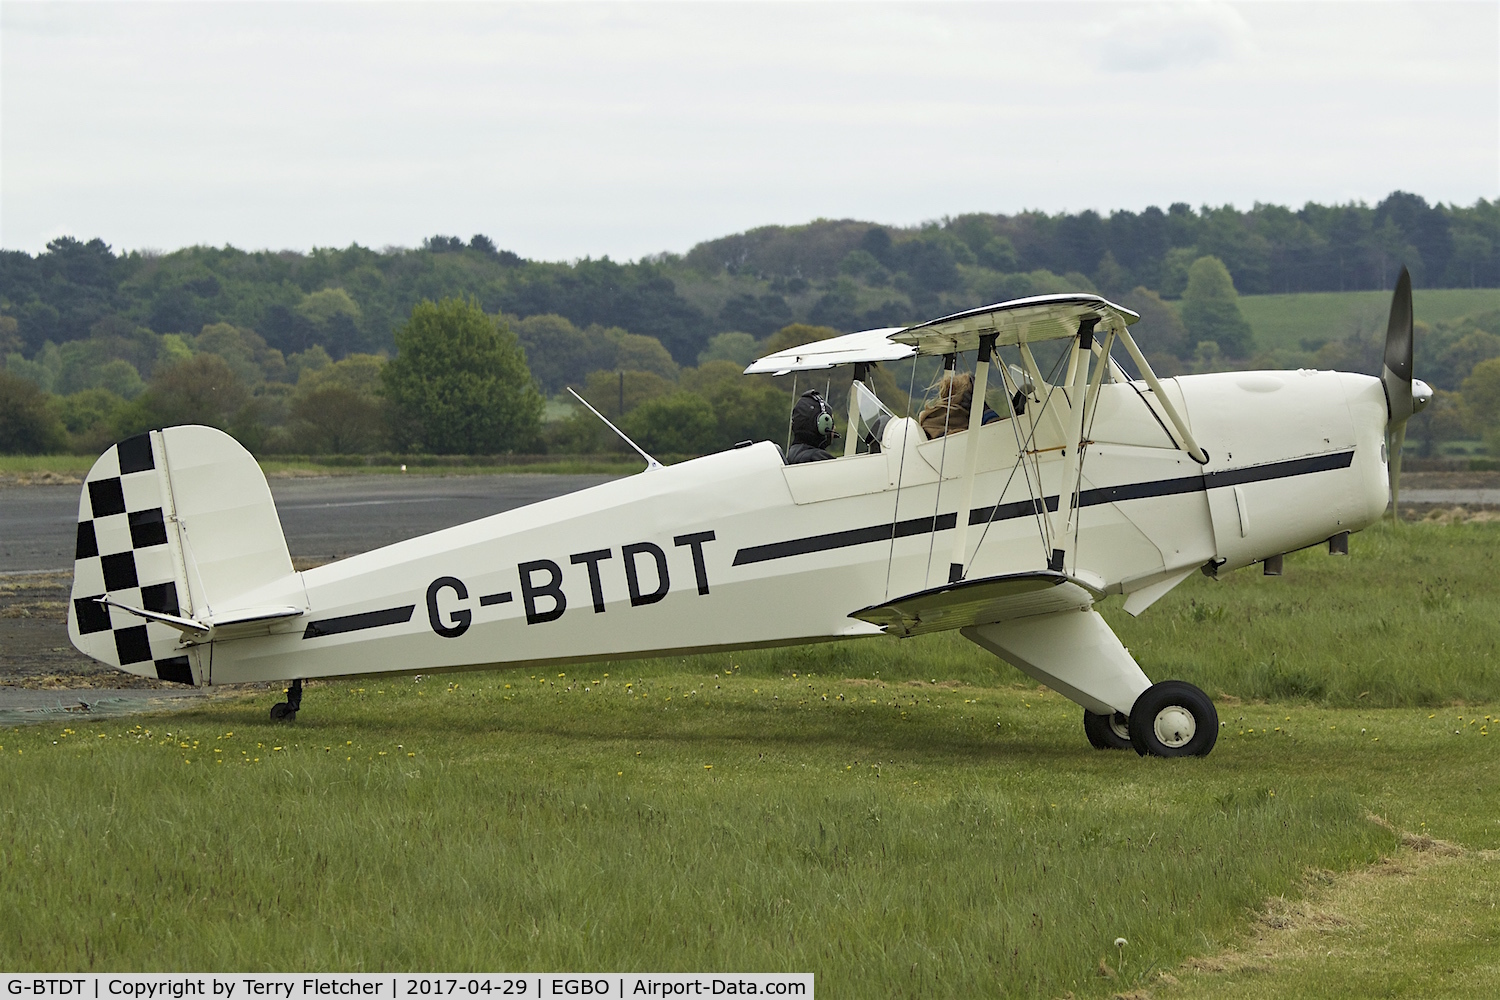 G-BTDT, 1957 CASA 1-131E Jungmann C/N 2131, At 2017 Radial and Trainer Fly-In at Wolverhampton Halfpenny Green Airport